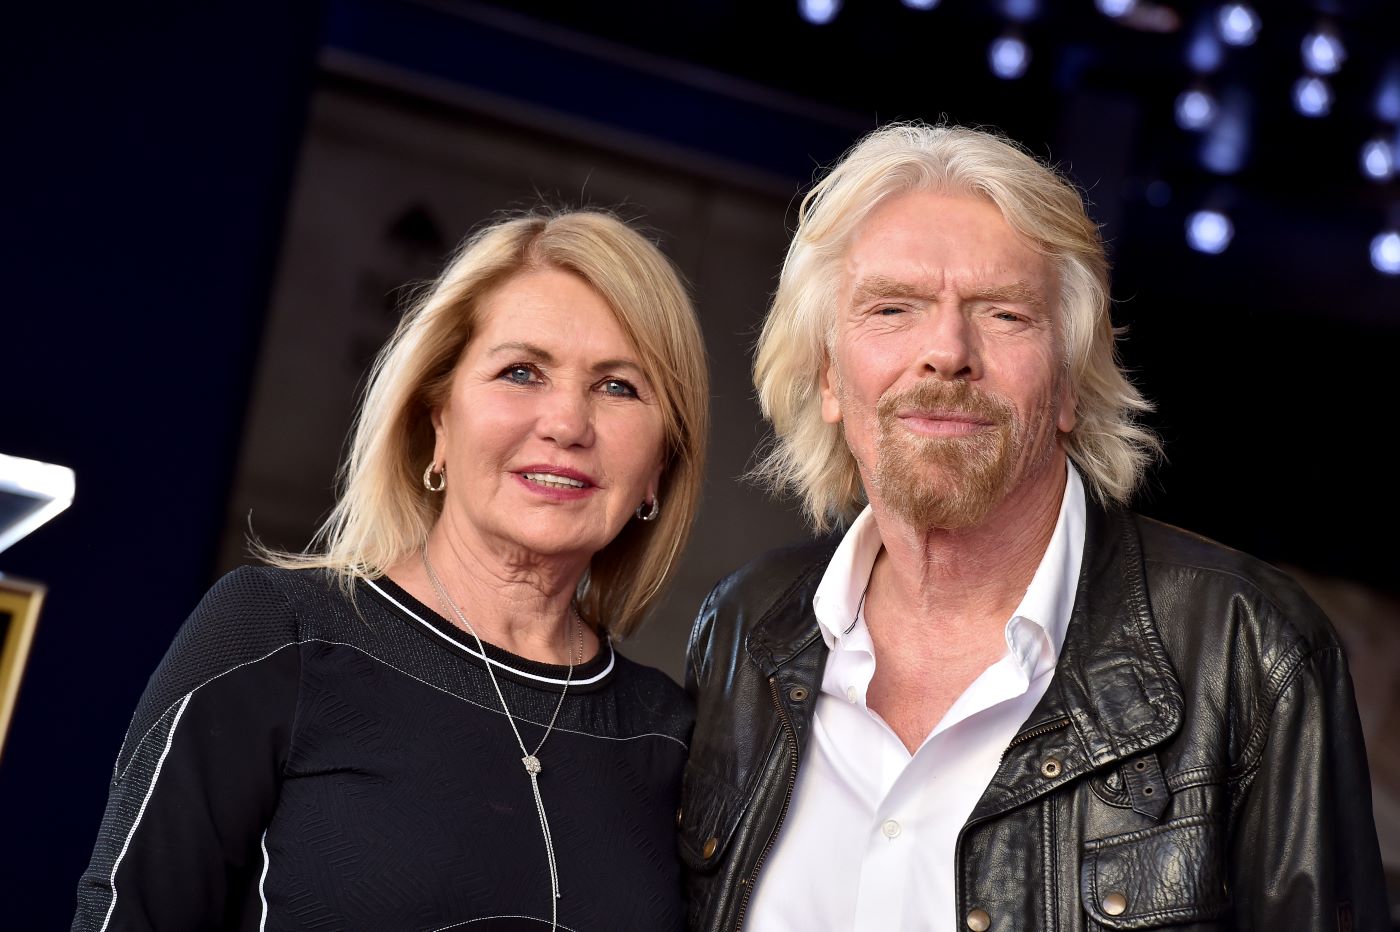 Picture of Joan Templeman, dressed in a black and grey top, and Sir Richard Branson, dressed in a white button-up shirt and black leather jacket in front of a blacked out background with a few blue lights scattered in the right-hand corner.